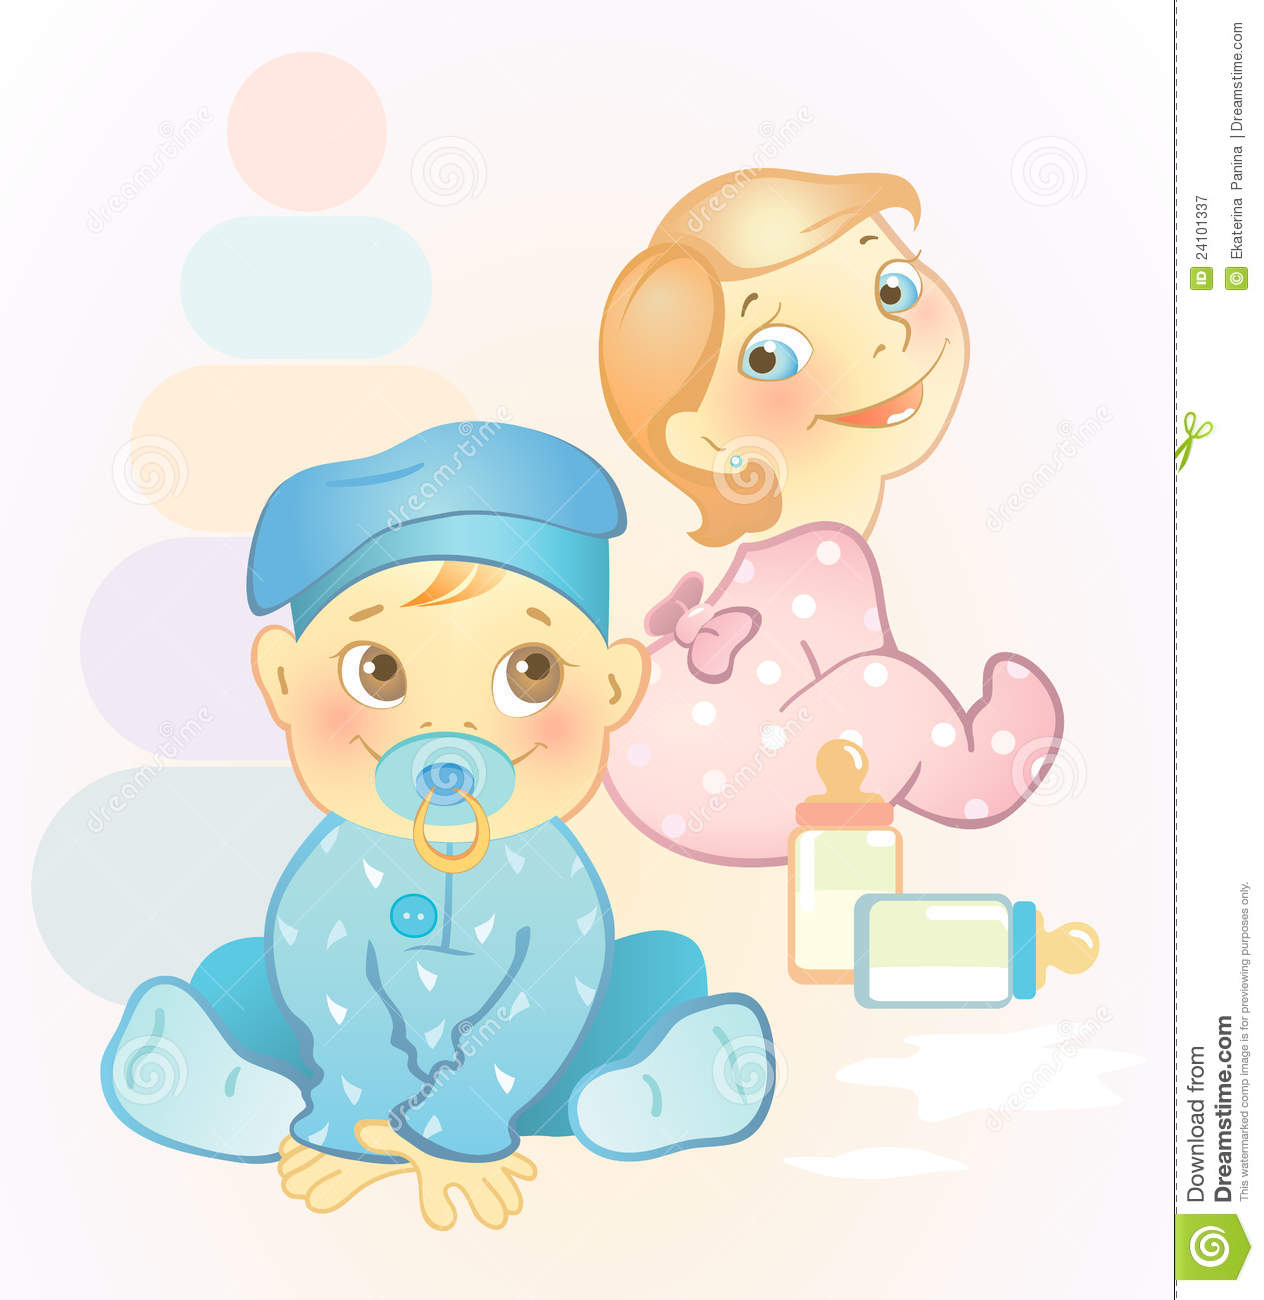 Two Babies Girl And Boy Royalty Free Stock Photography   Image